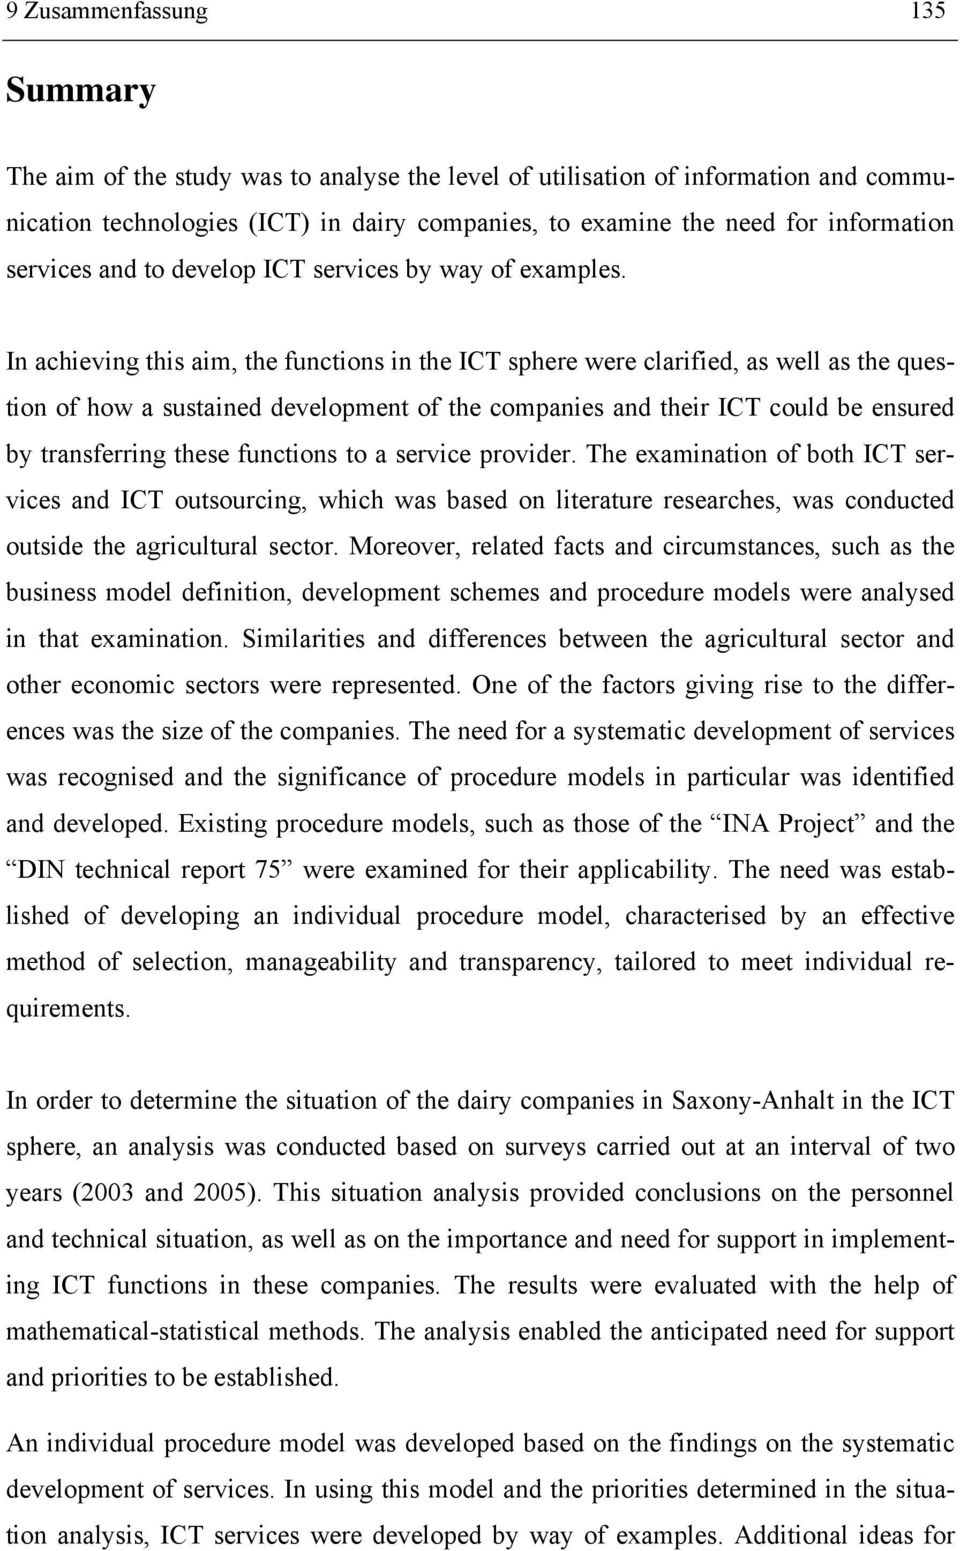 In achieving this aim, the functions in the ICT sphere were clarified, as well as the question of how a sustained development of the companies and their ICT could be ensured by transferring these